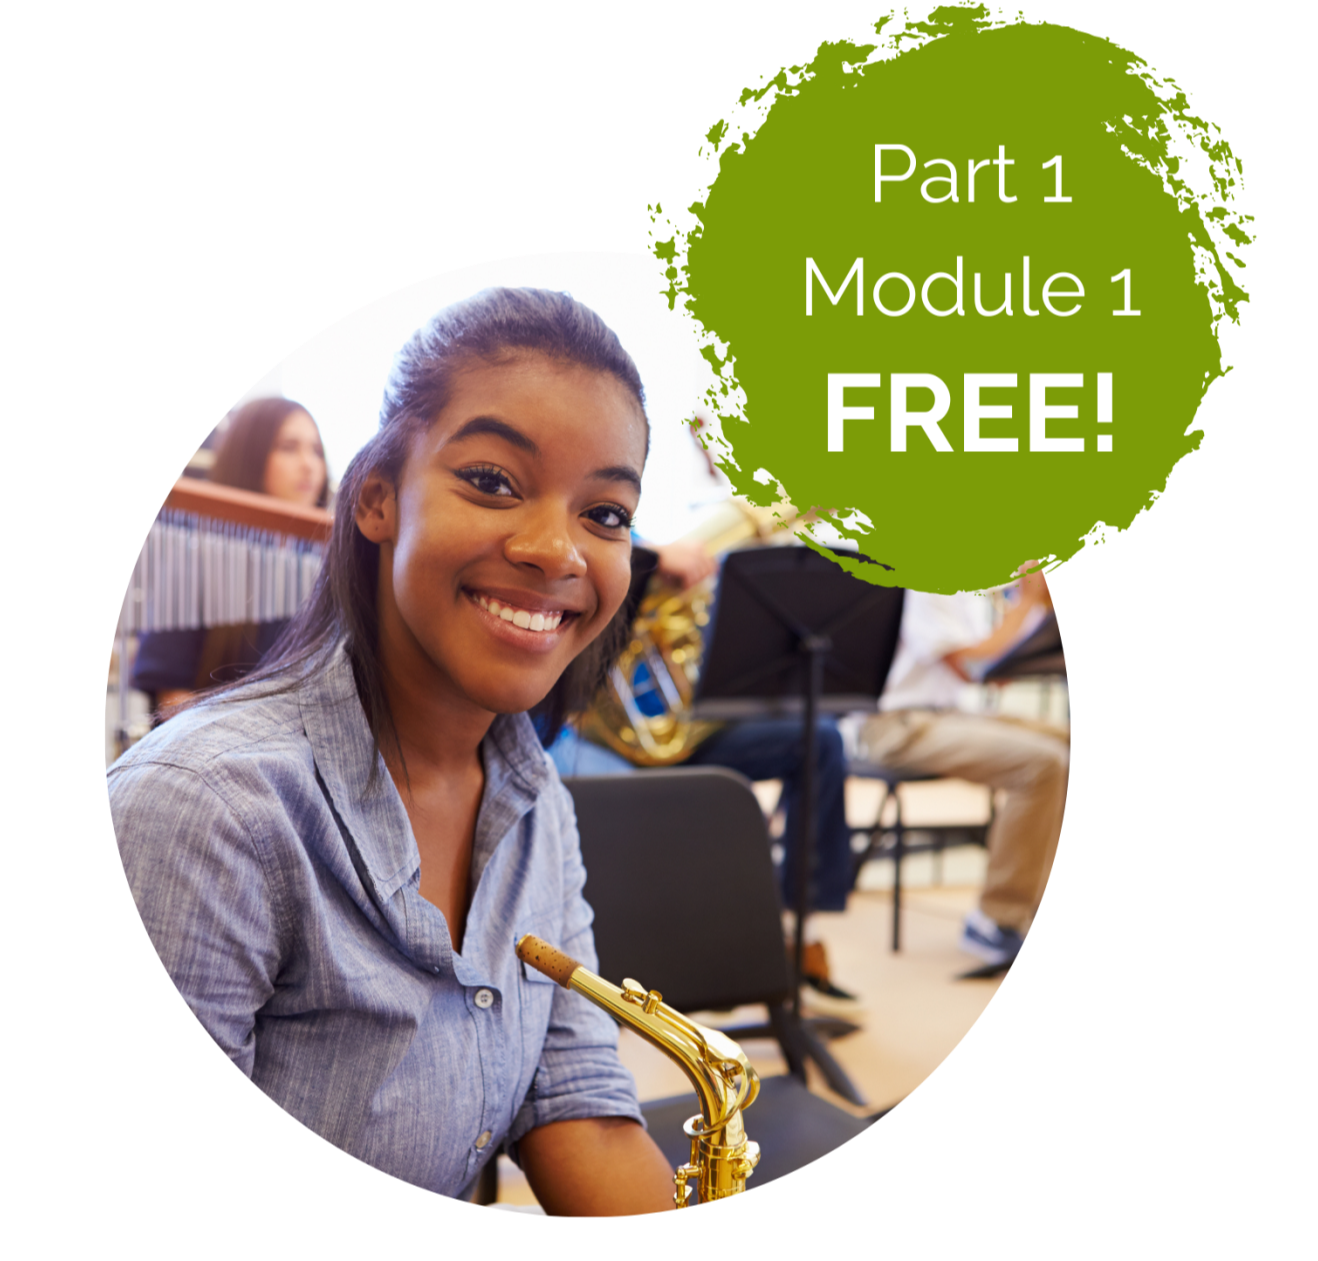 Limited Time Only: Module 1 Free